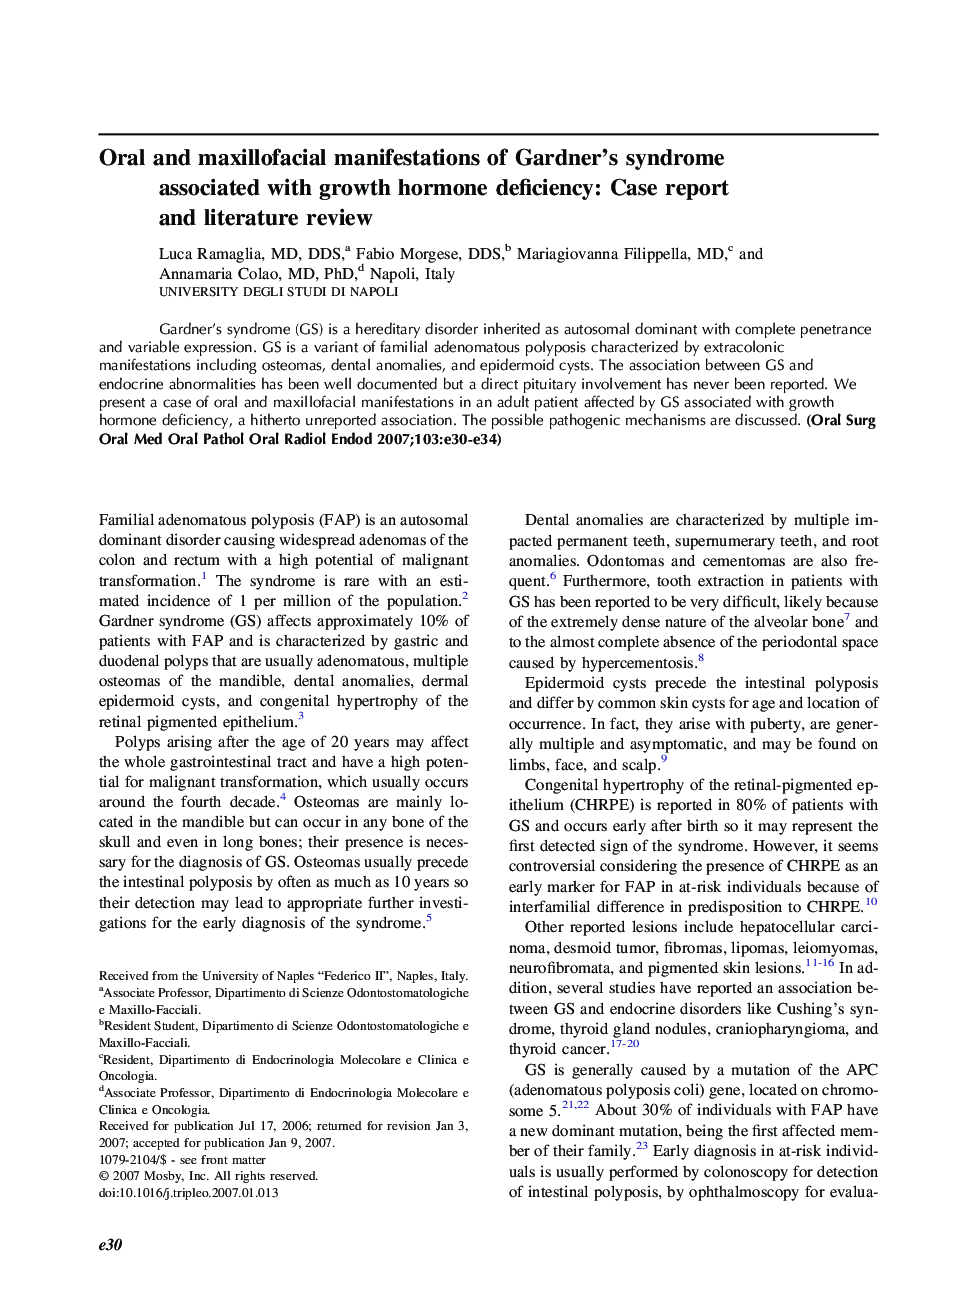 Oral and maxillofacial manifestations of Gardner’s syndrome associated with growth hormone deficiency: Case report and literature review